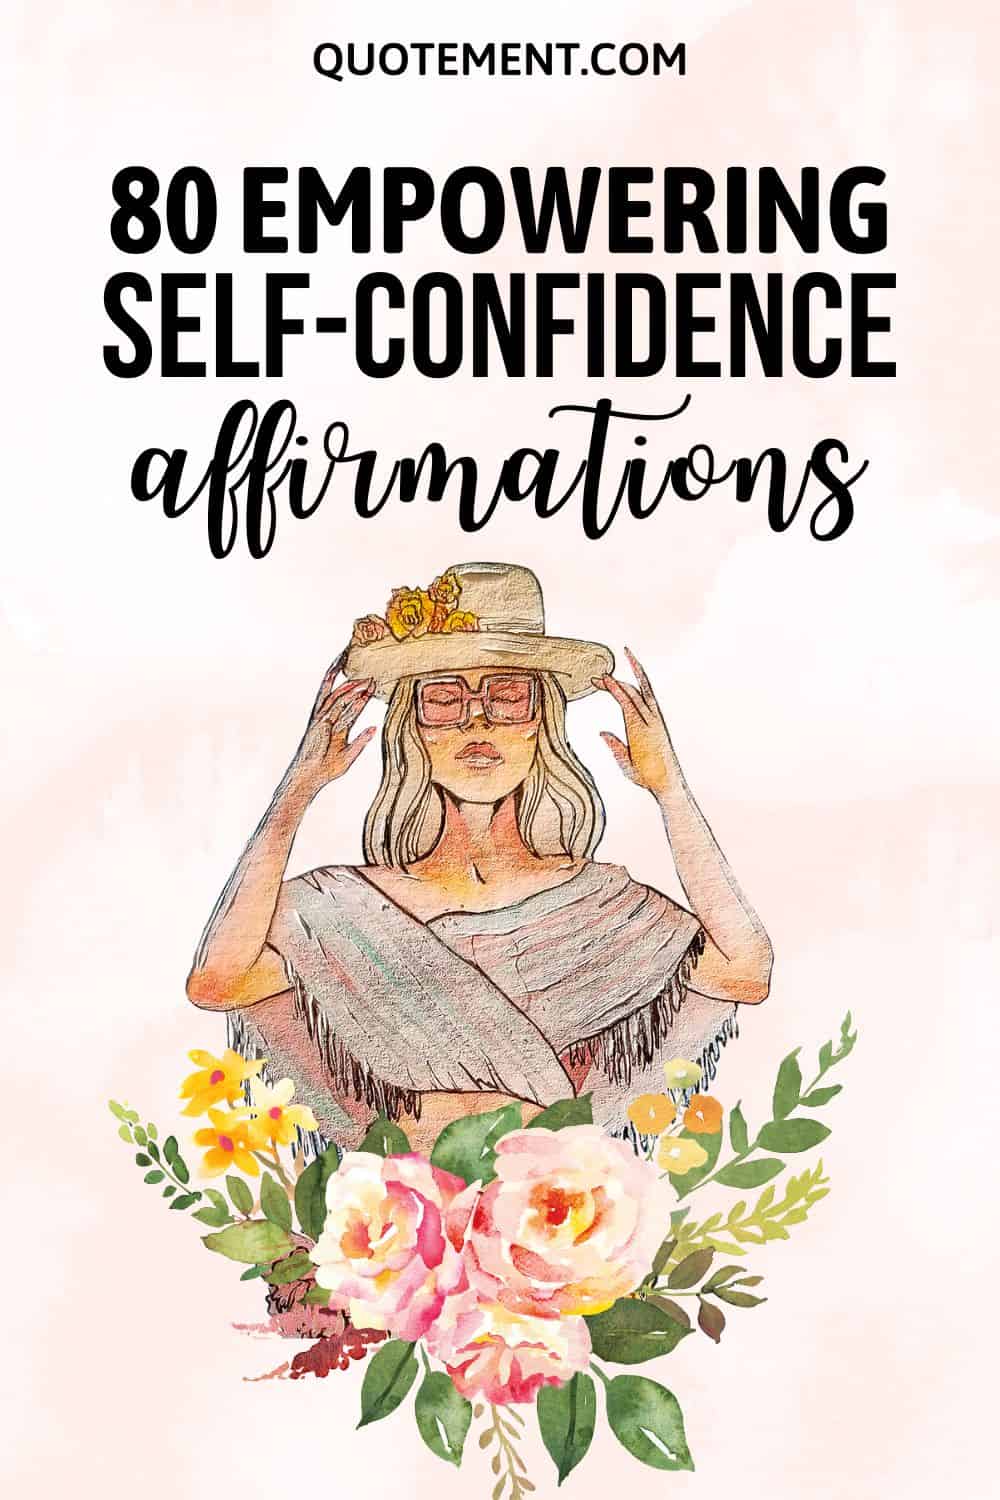 80 Inspirational Confidence Affirmations To Empower You
